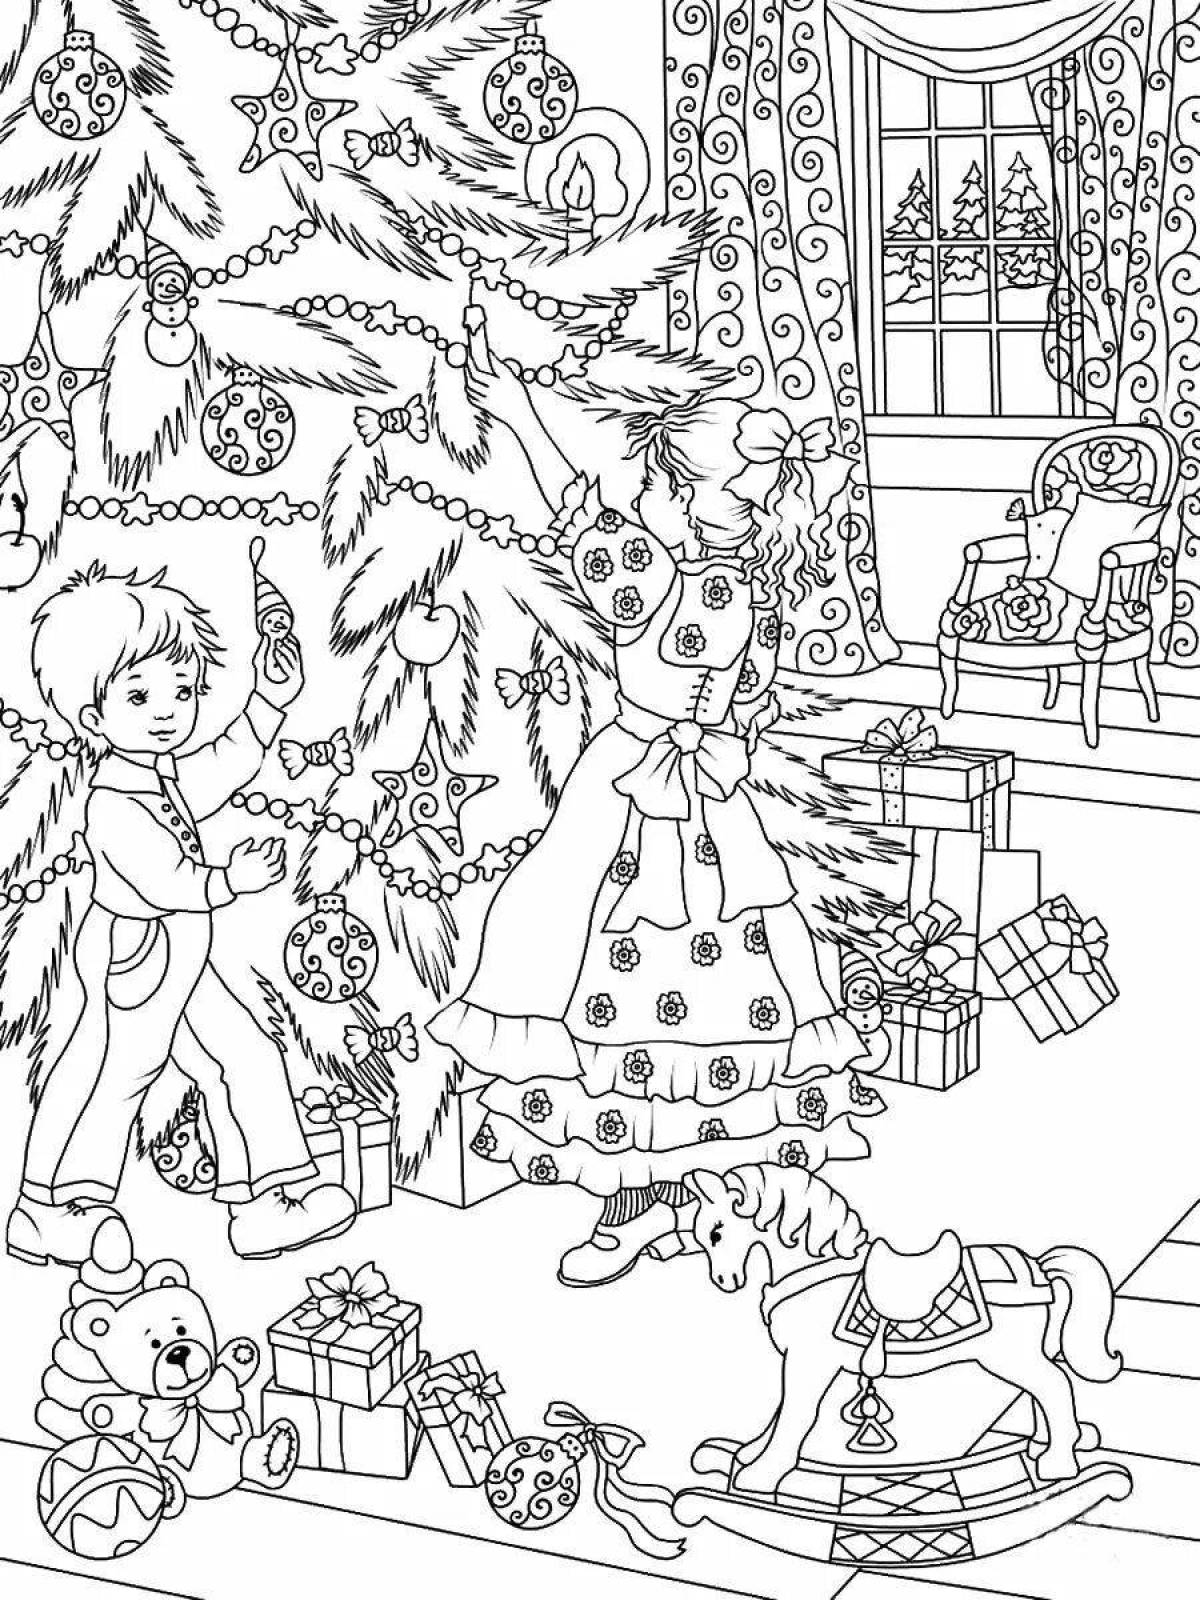 Funny christmas story coloring book